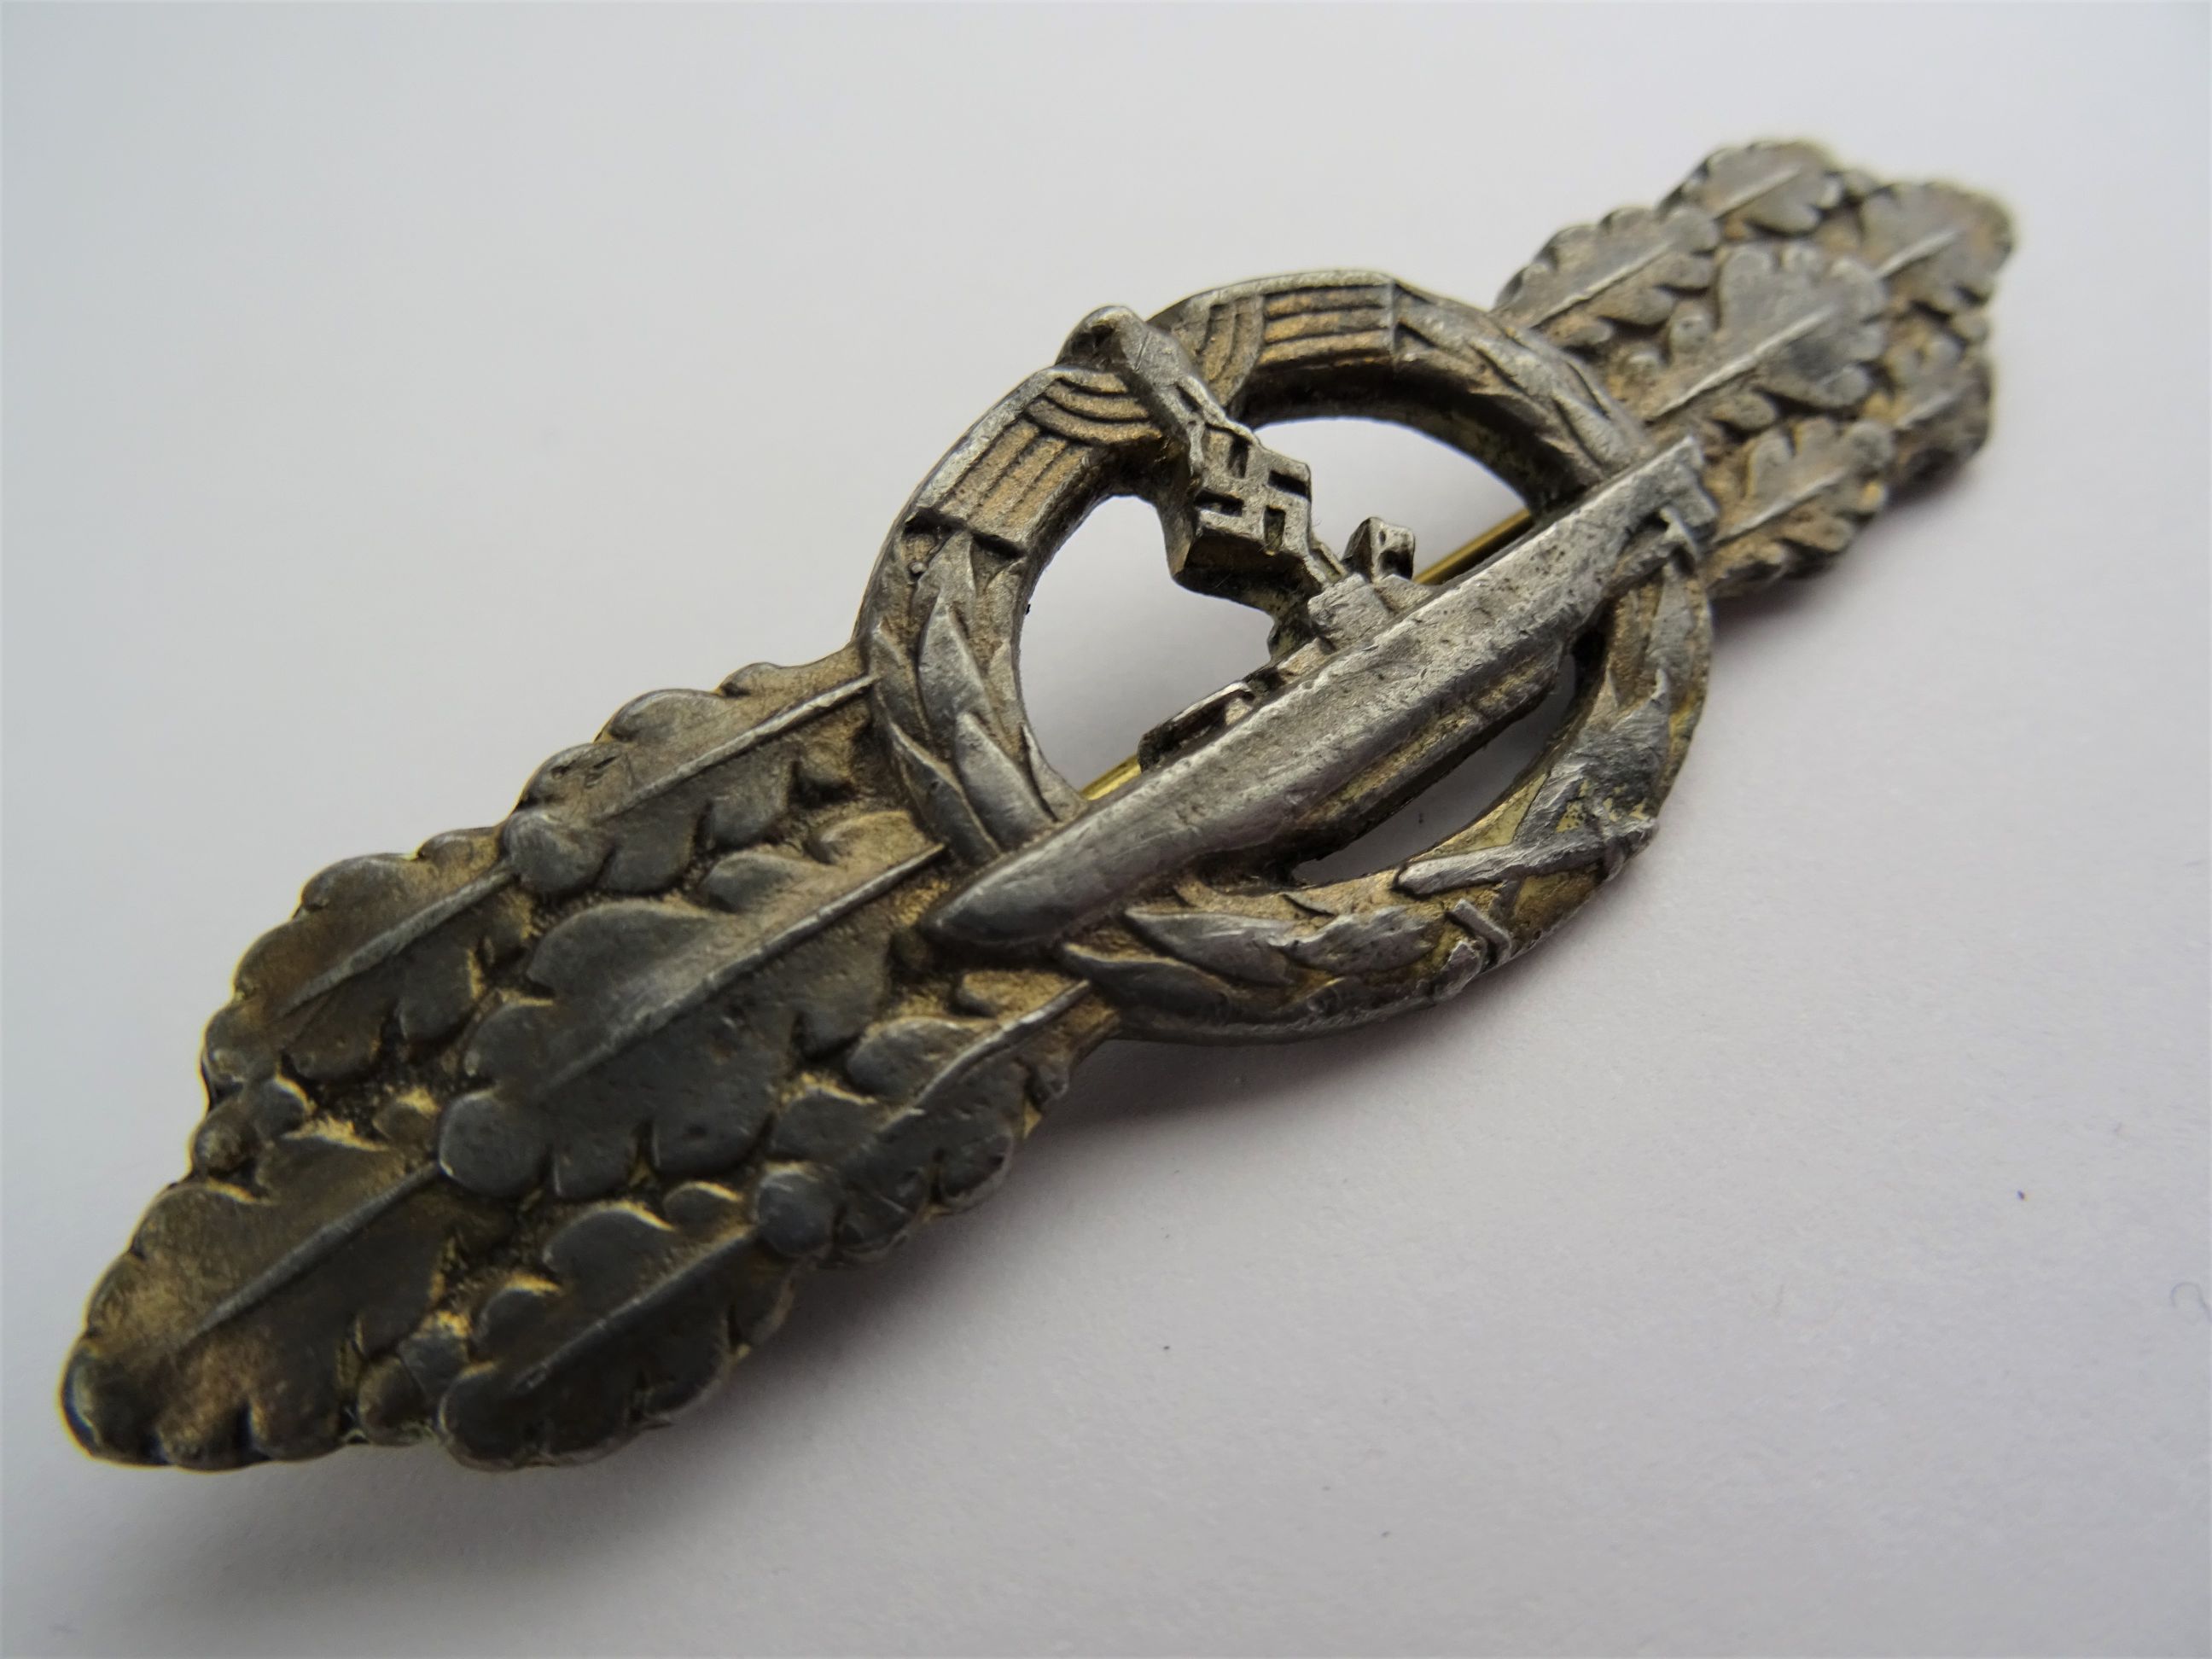 Sweetheart Brooches, Badges & Insignia: GERMAN THIRD REICH U-BOAT